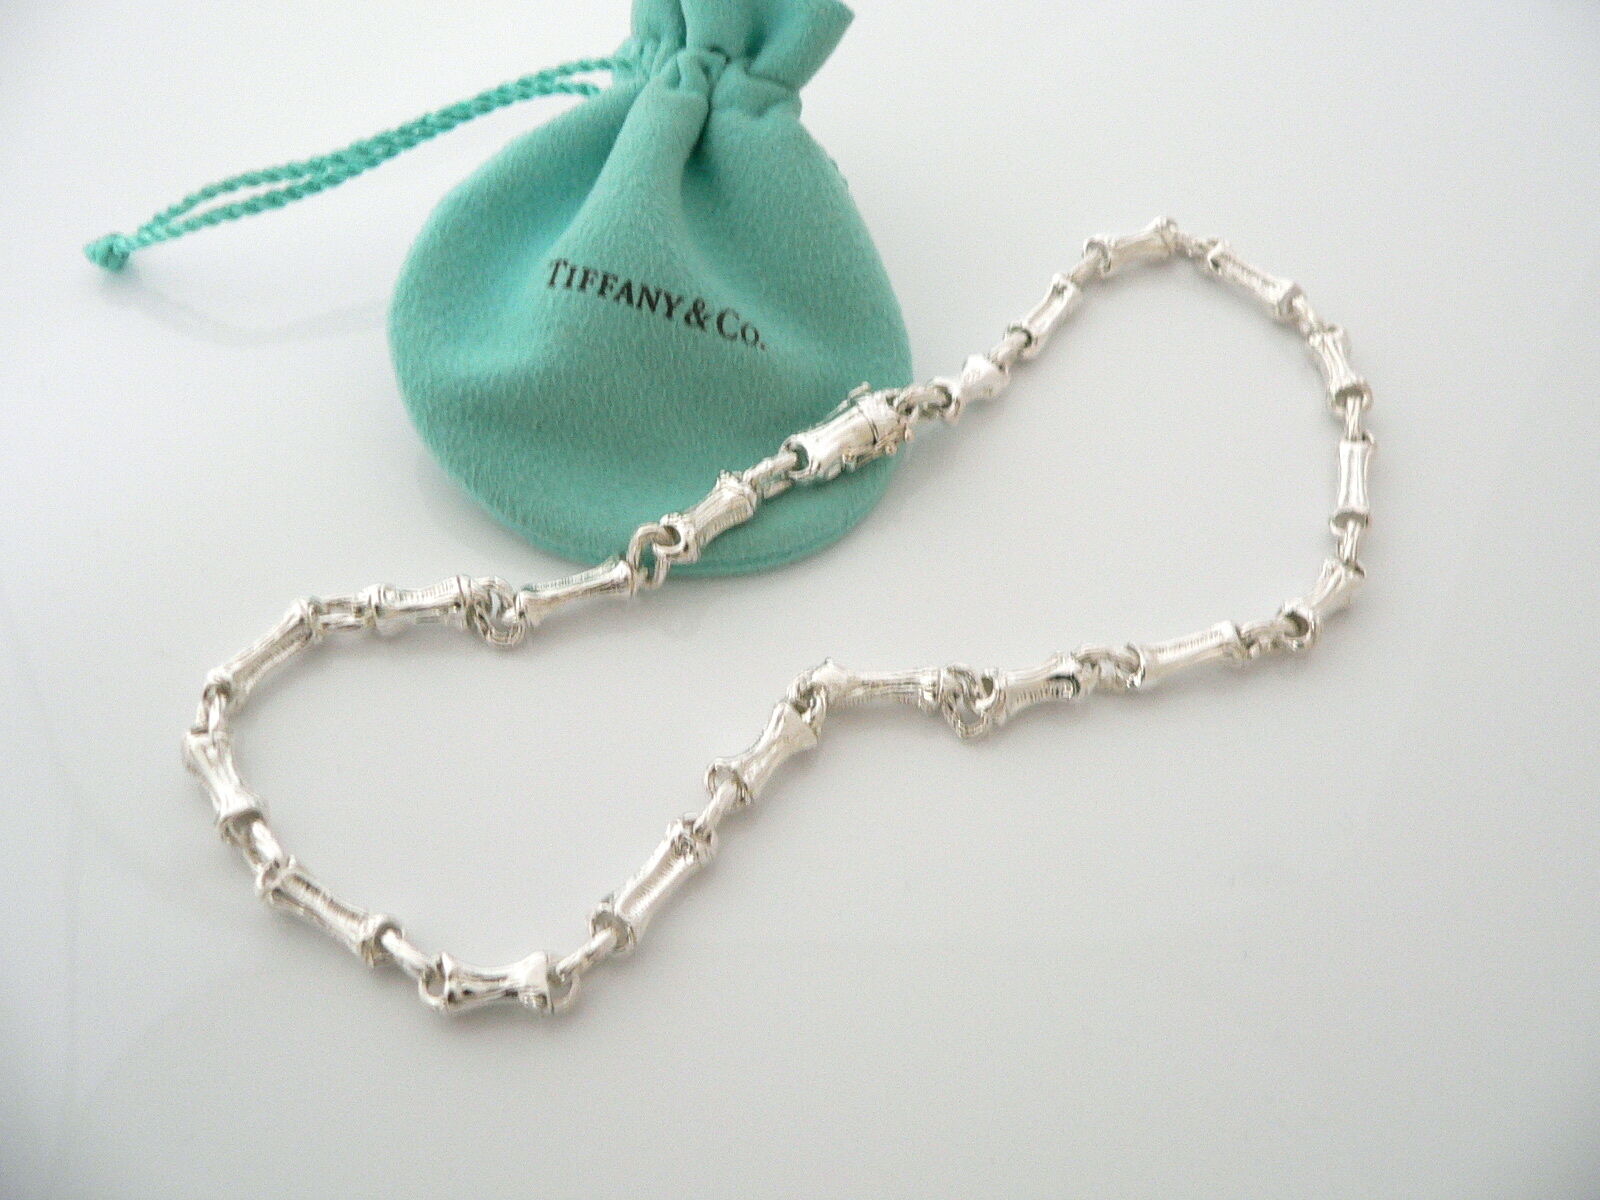 Tiffany & Co Bamboo Necklace Link Pendant Silver Nature Chain Gift Pouch Love